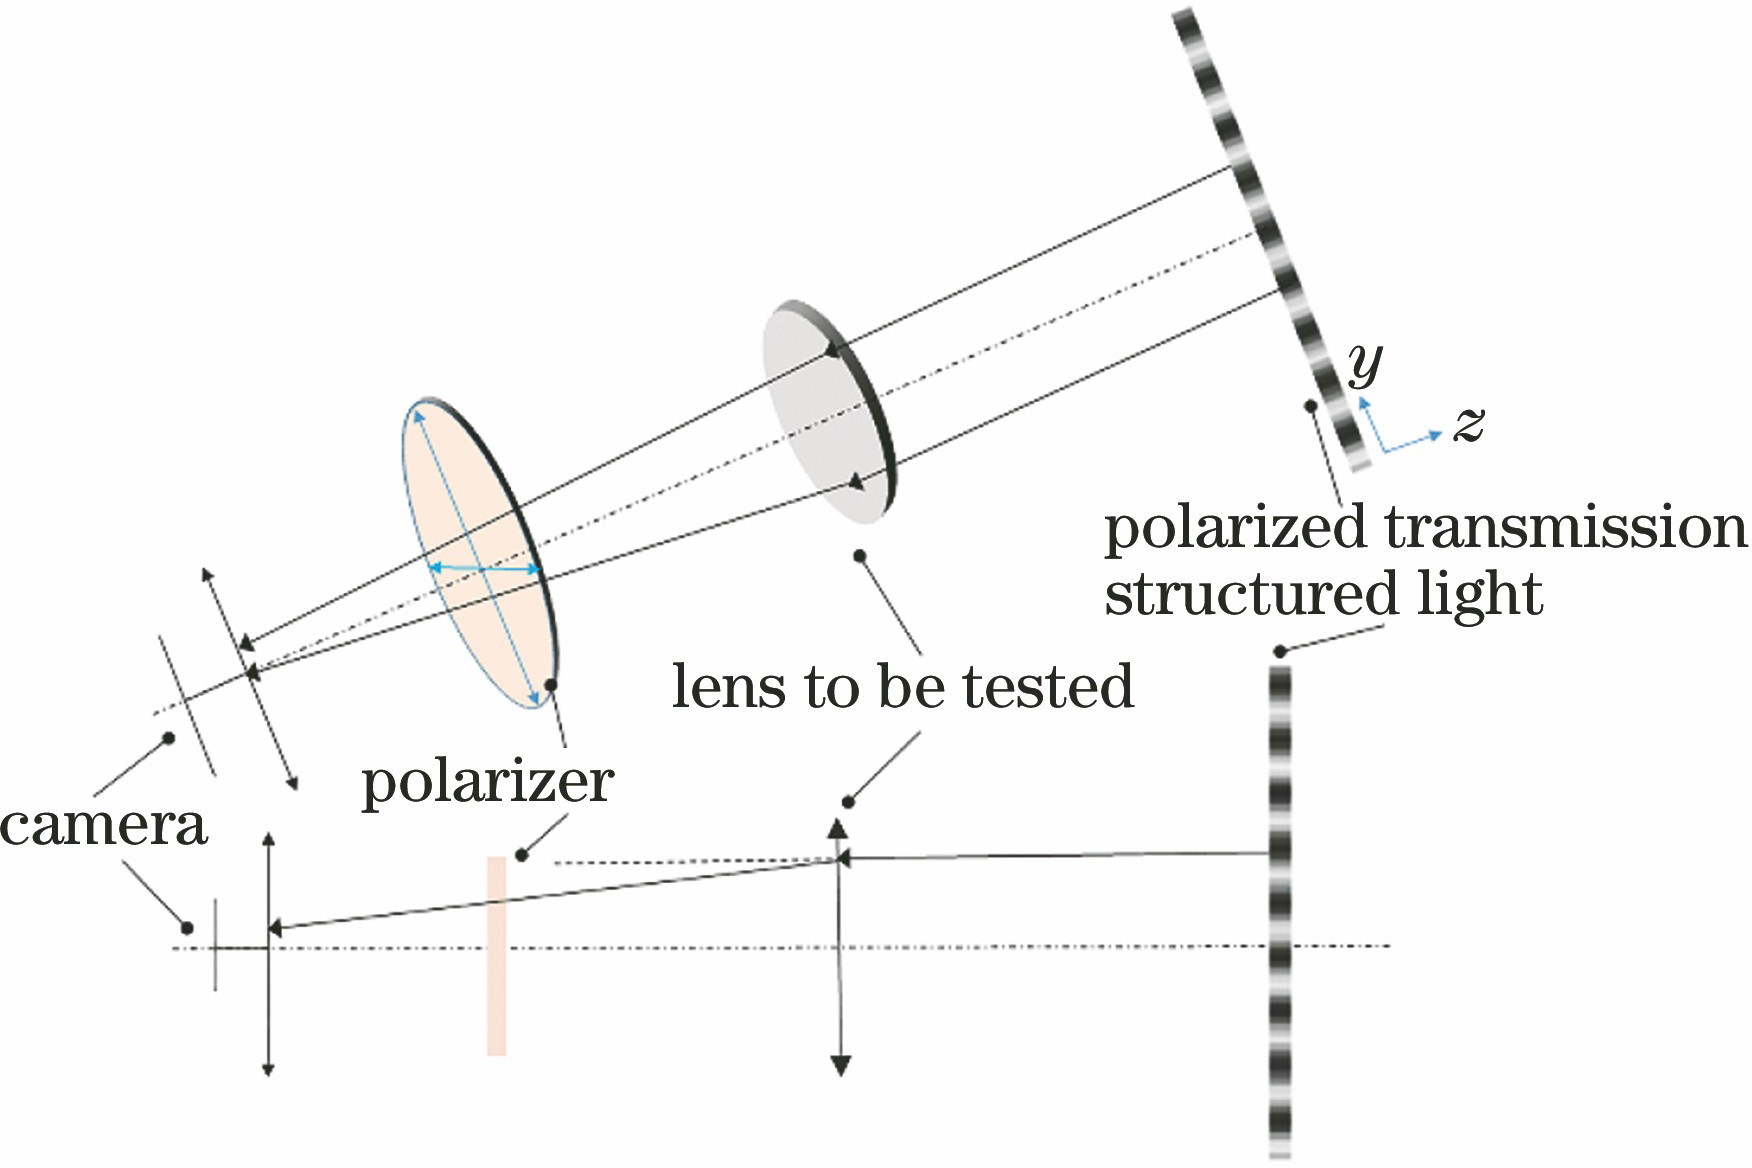 Schematic of detection principle for polarized transmission structured light